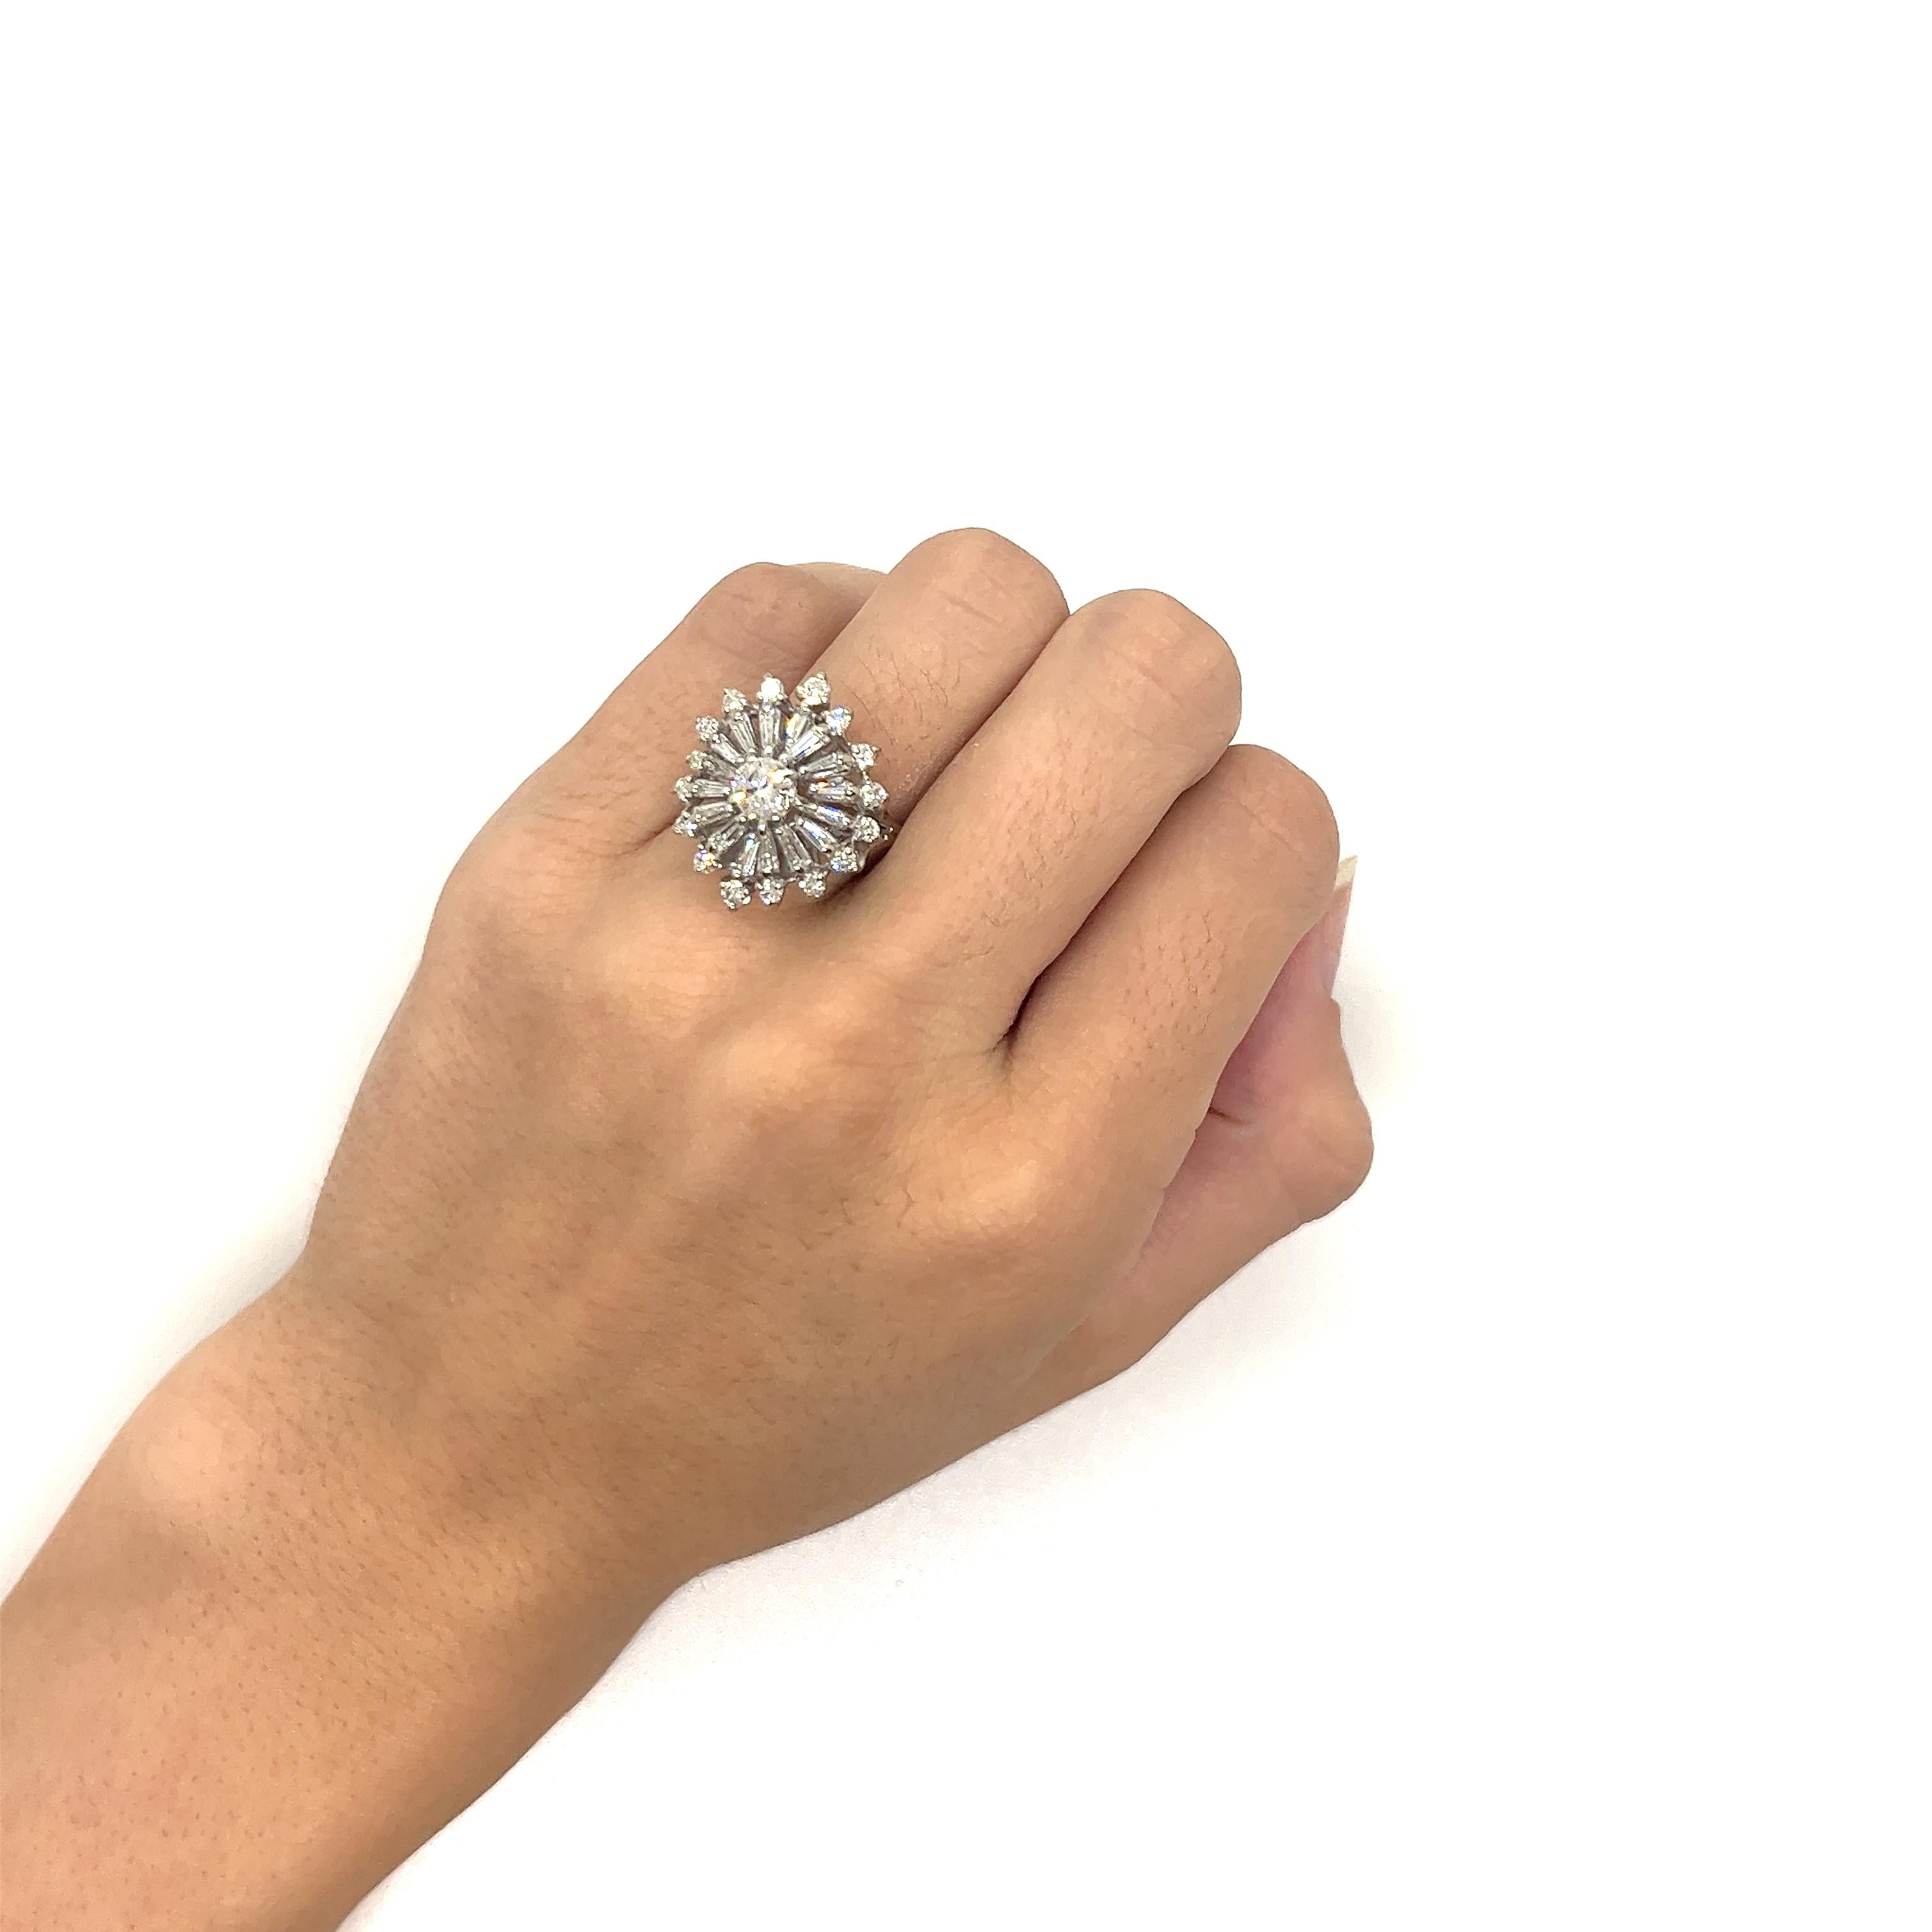 Vintage 1960s Diamond Starburst Cocktail Ring In Good Condition For Sale In Boston, MA